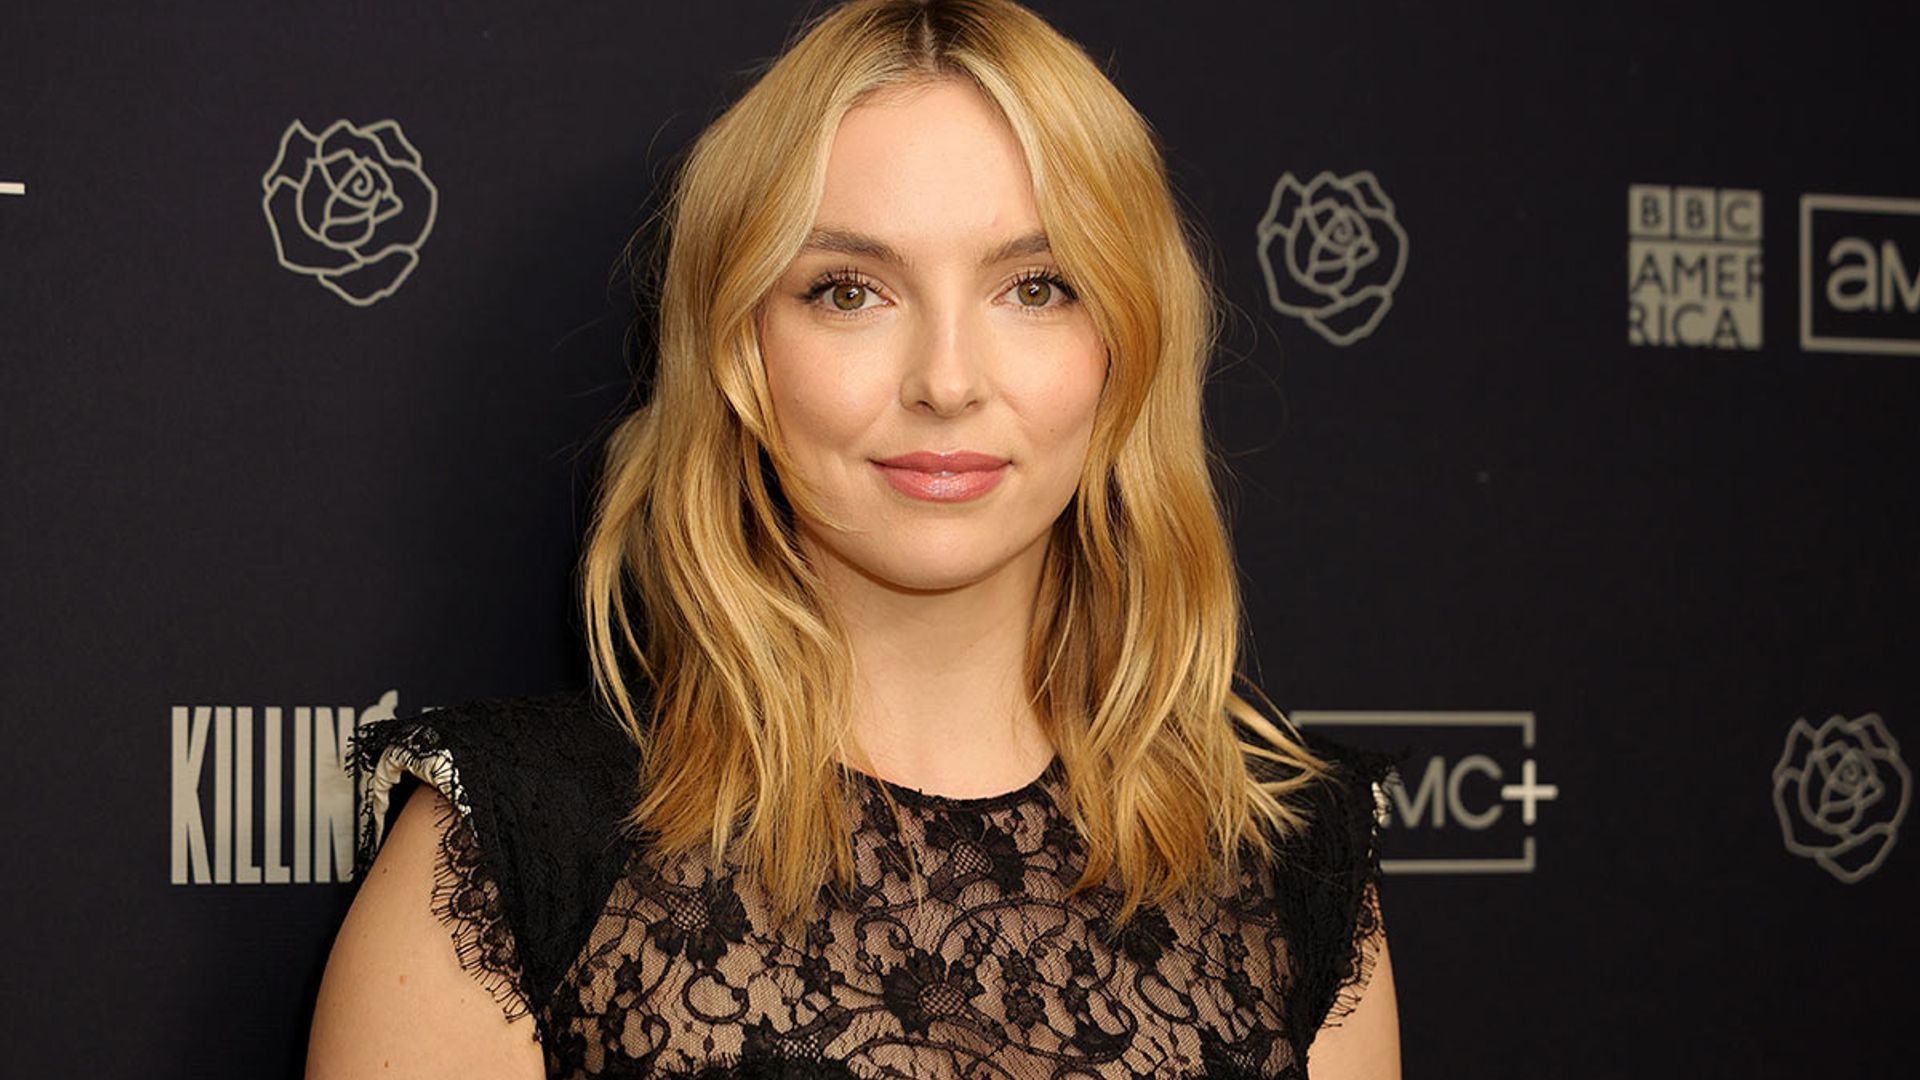 Inside Jodie Comer's unexpected modest home life - it will surprise you ...